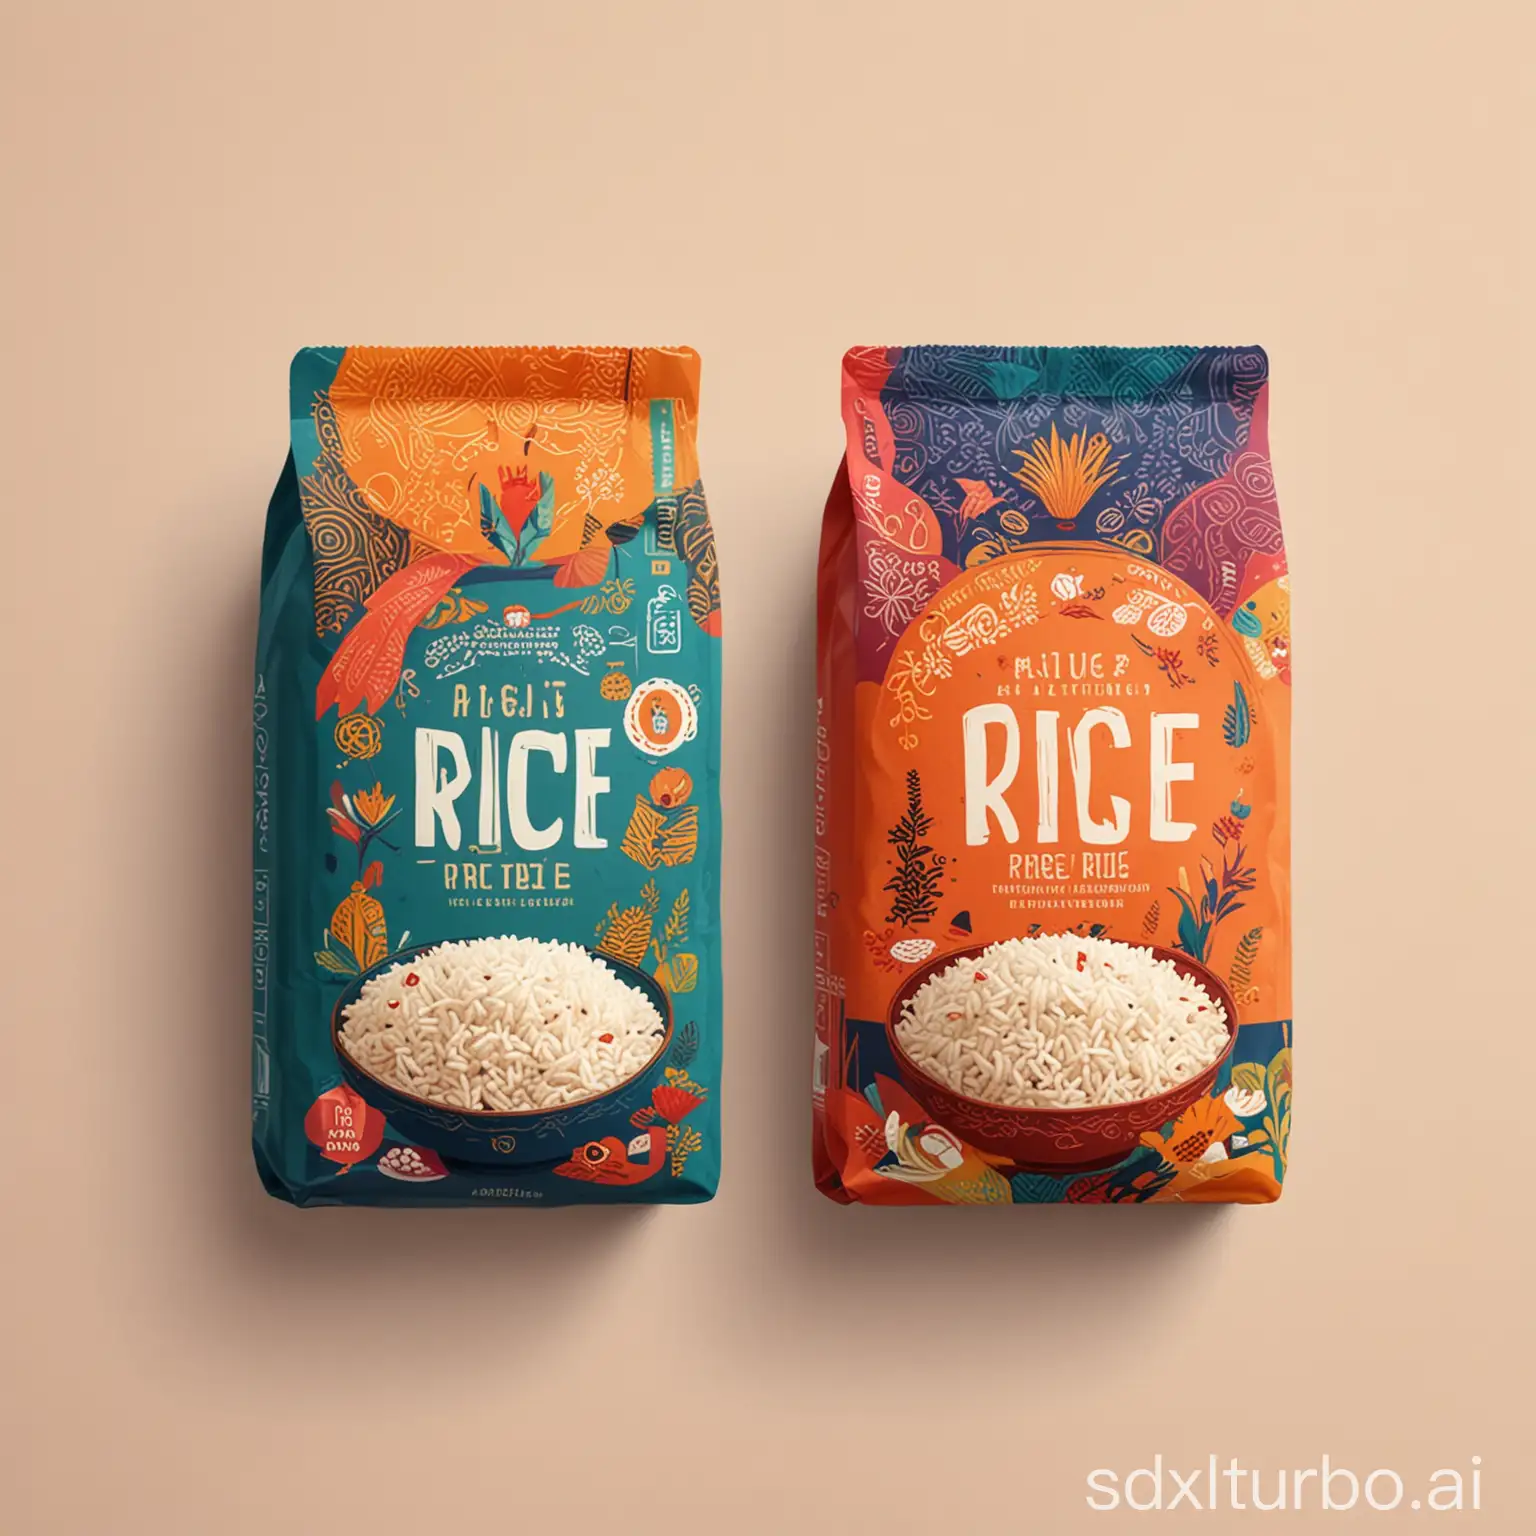 rice packaging design illustration, flat style, ethnic, colorful with personality